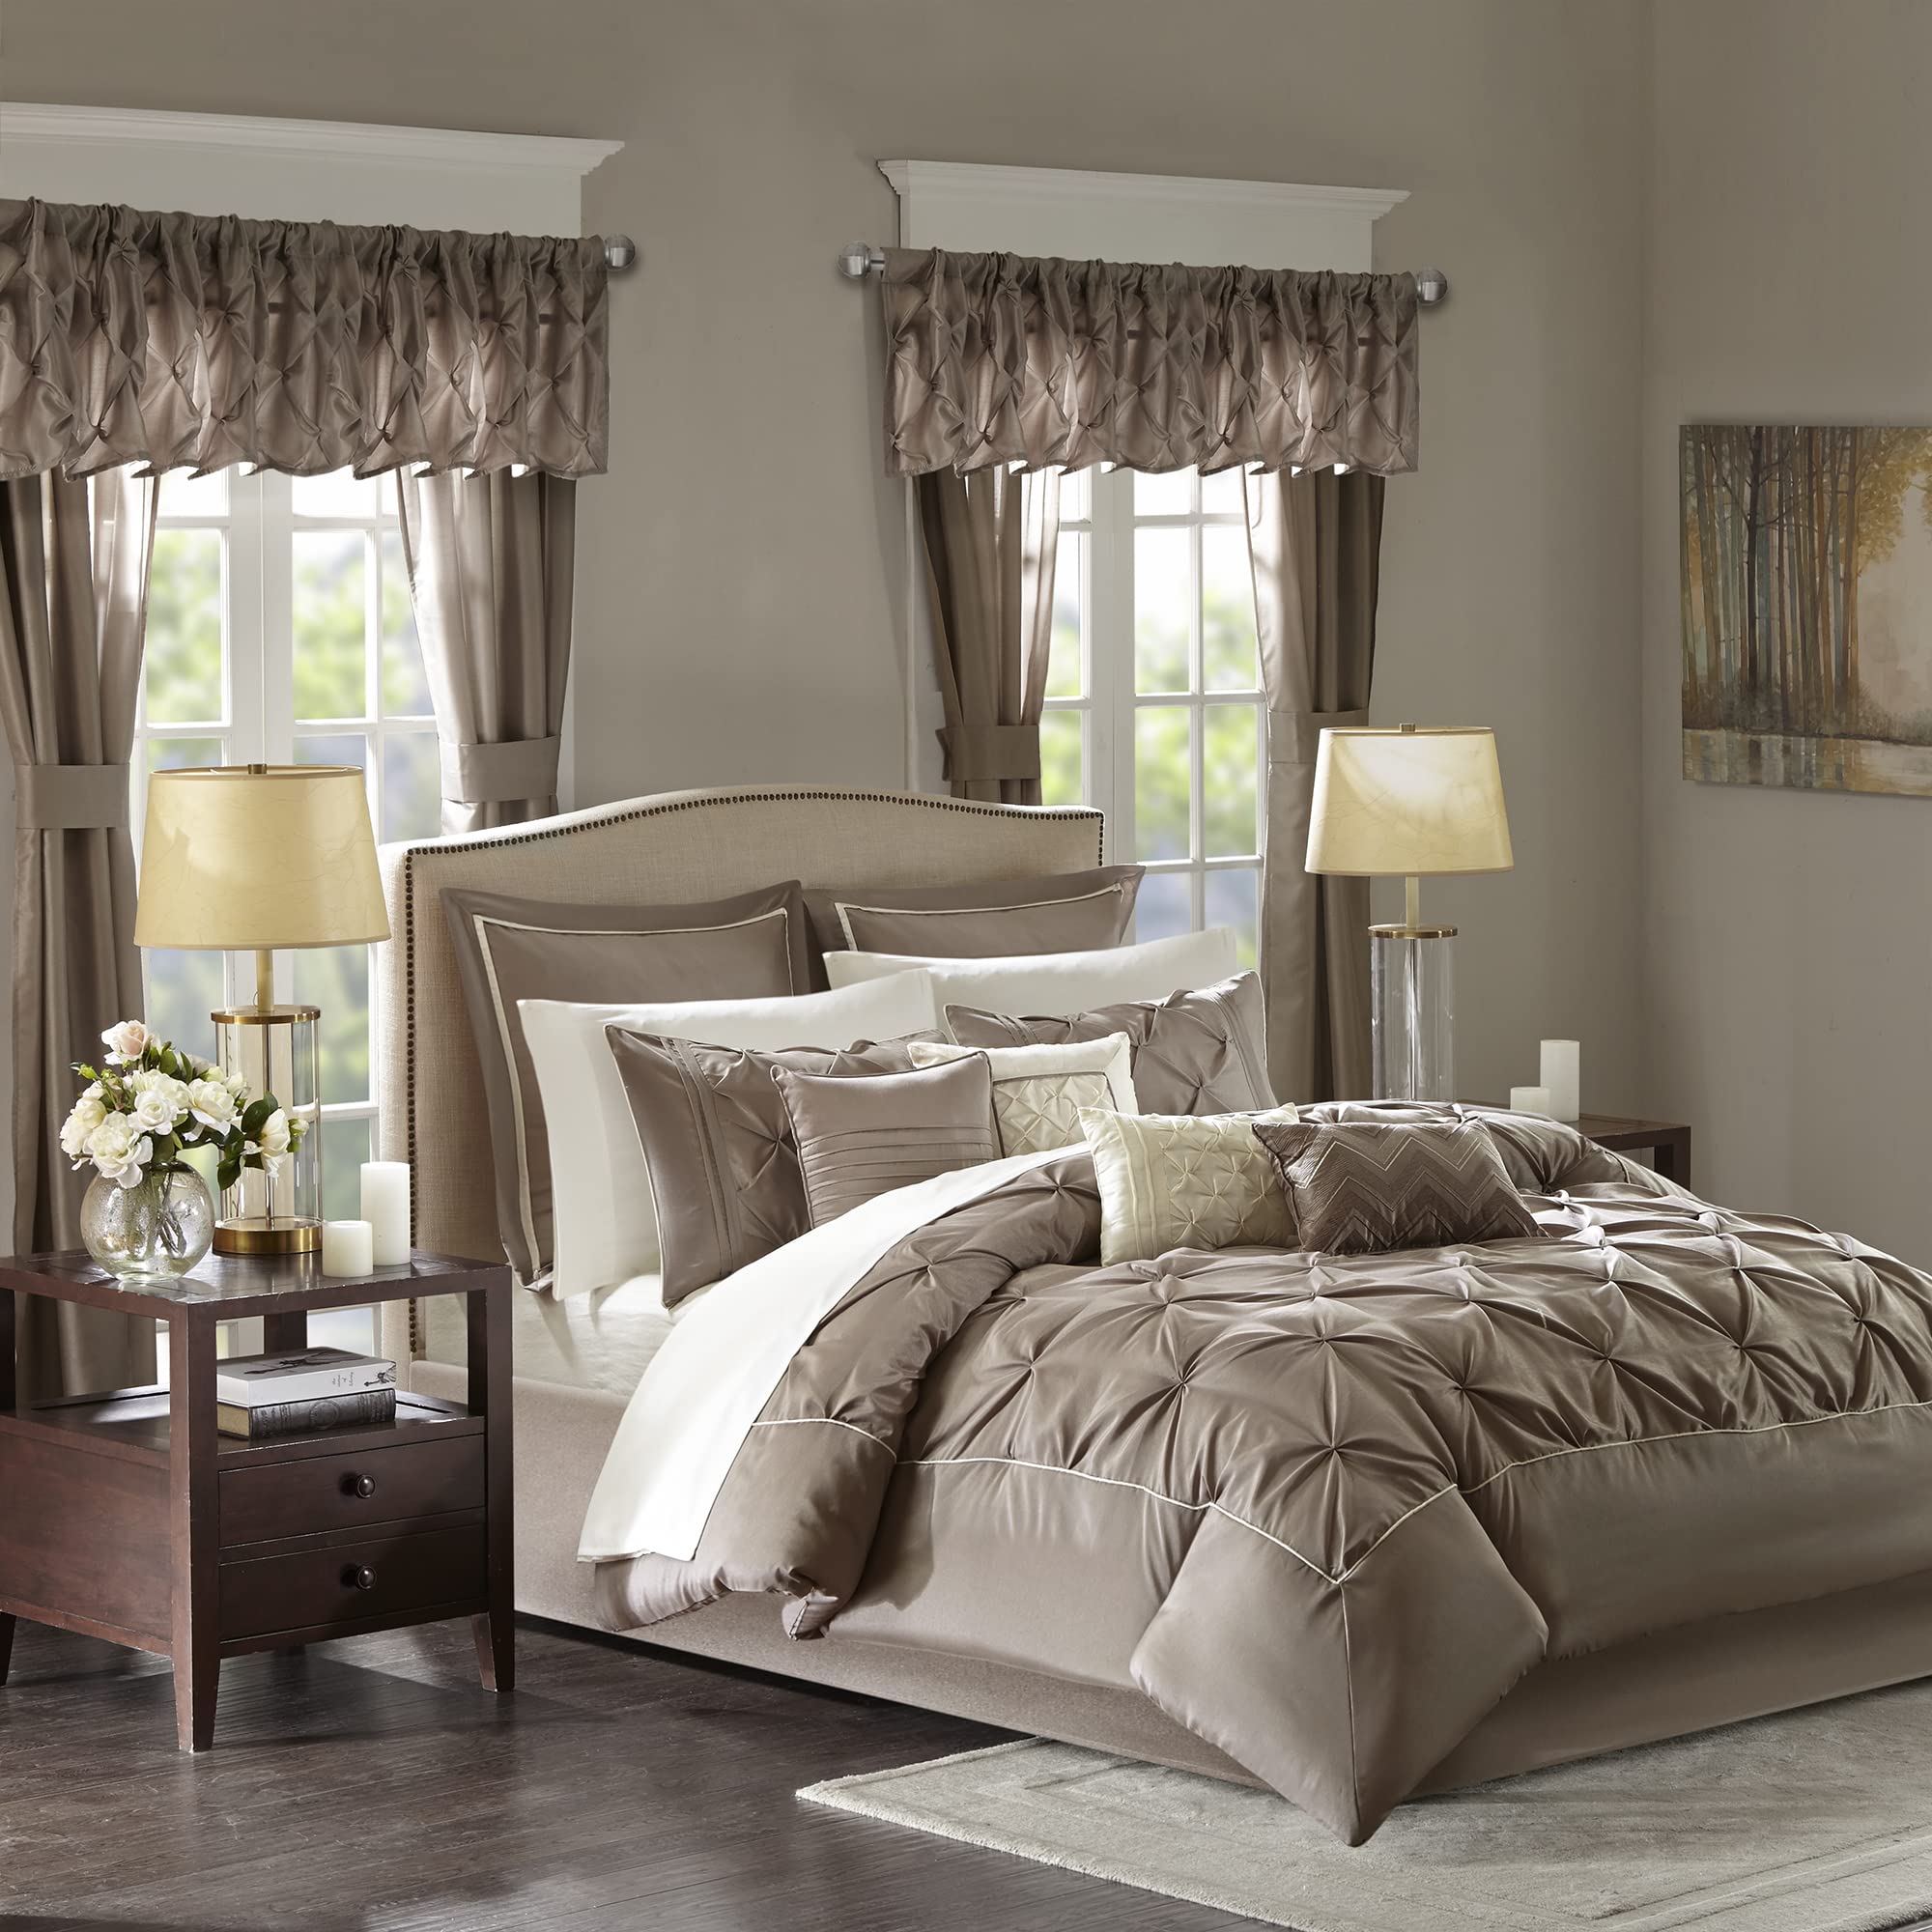 modern comforter sets with matching curtains